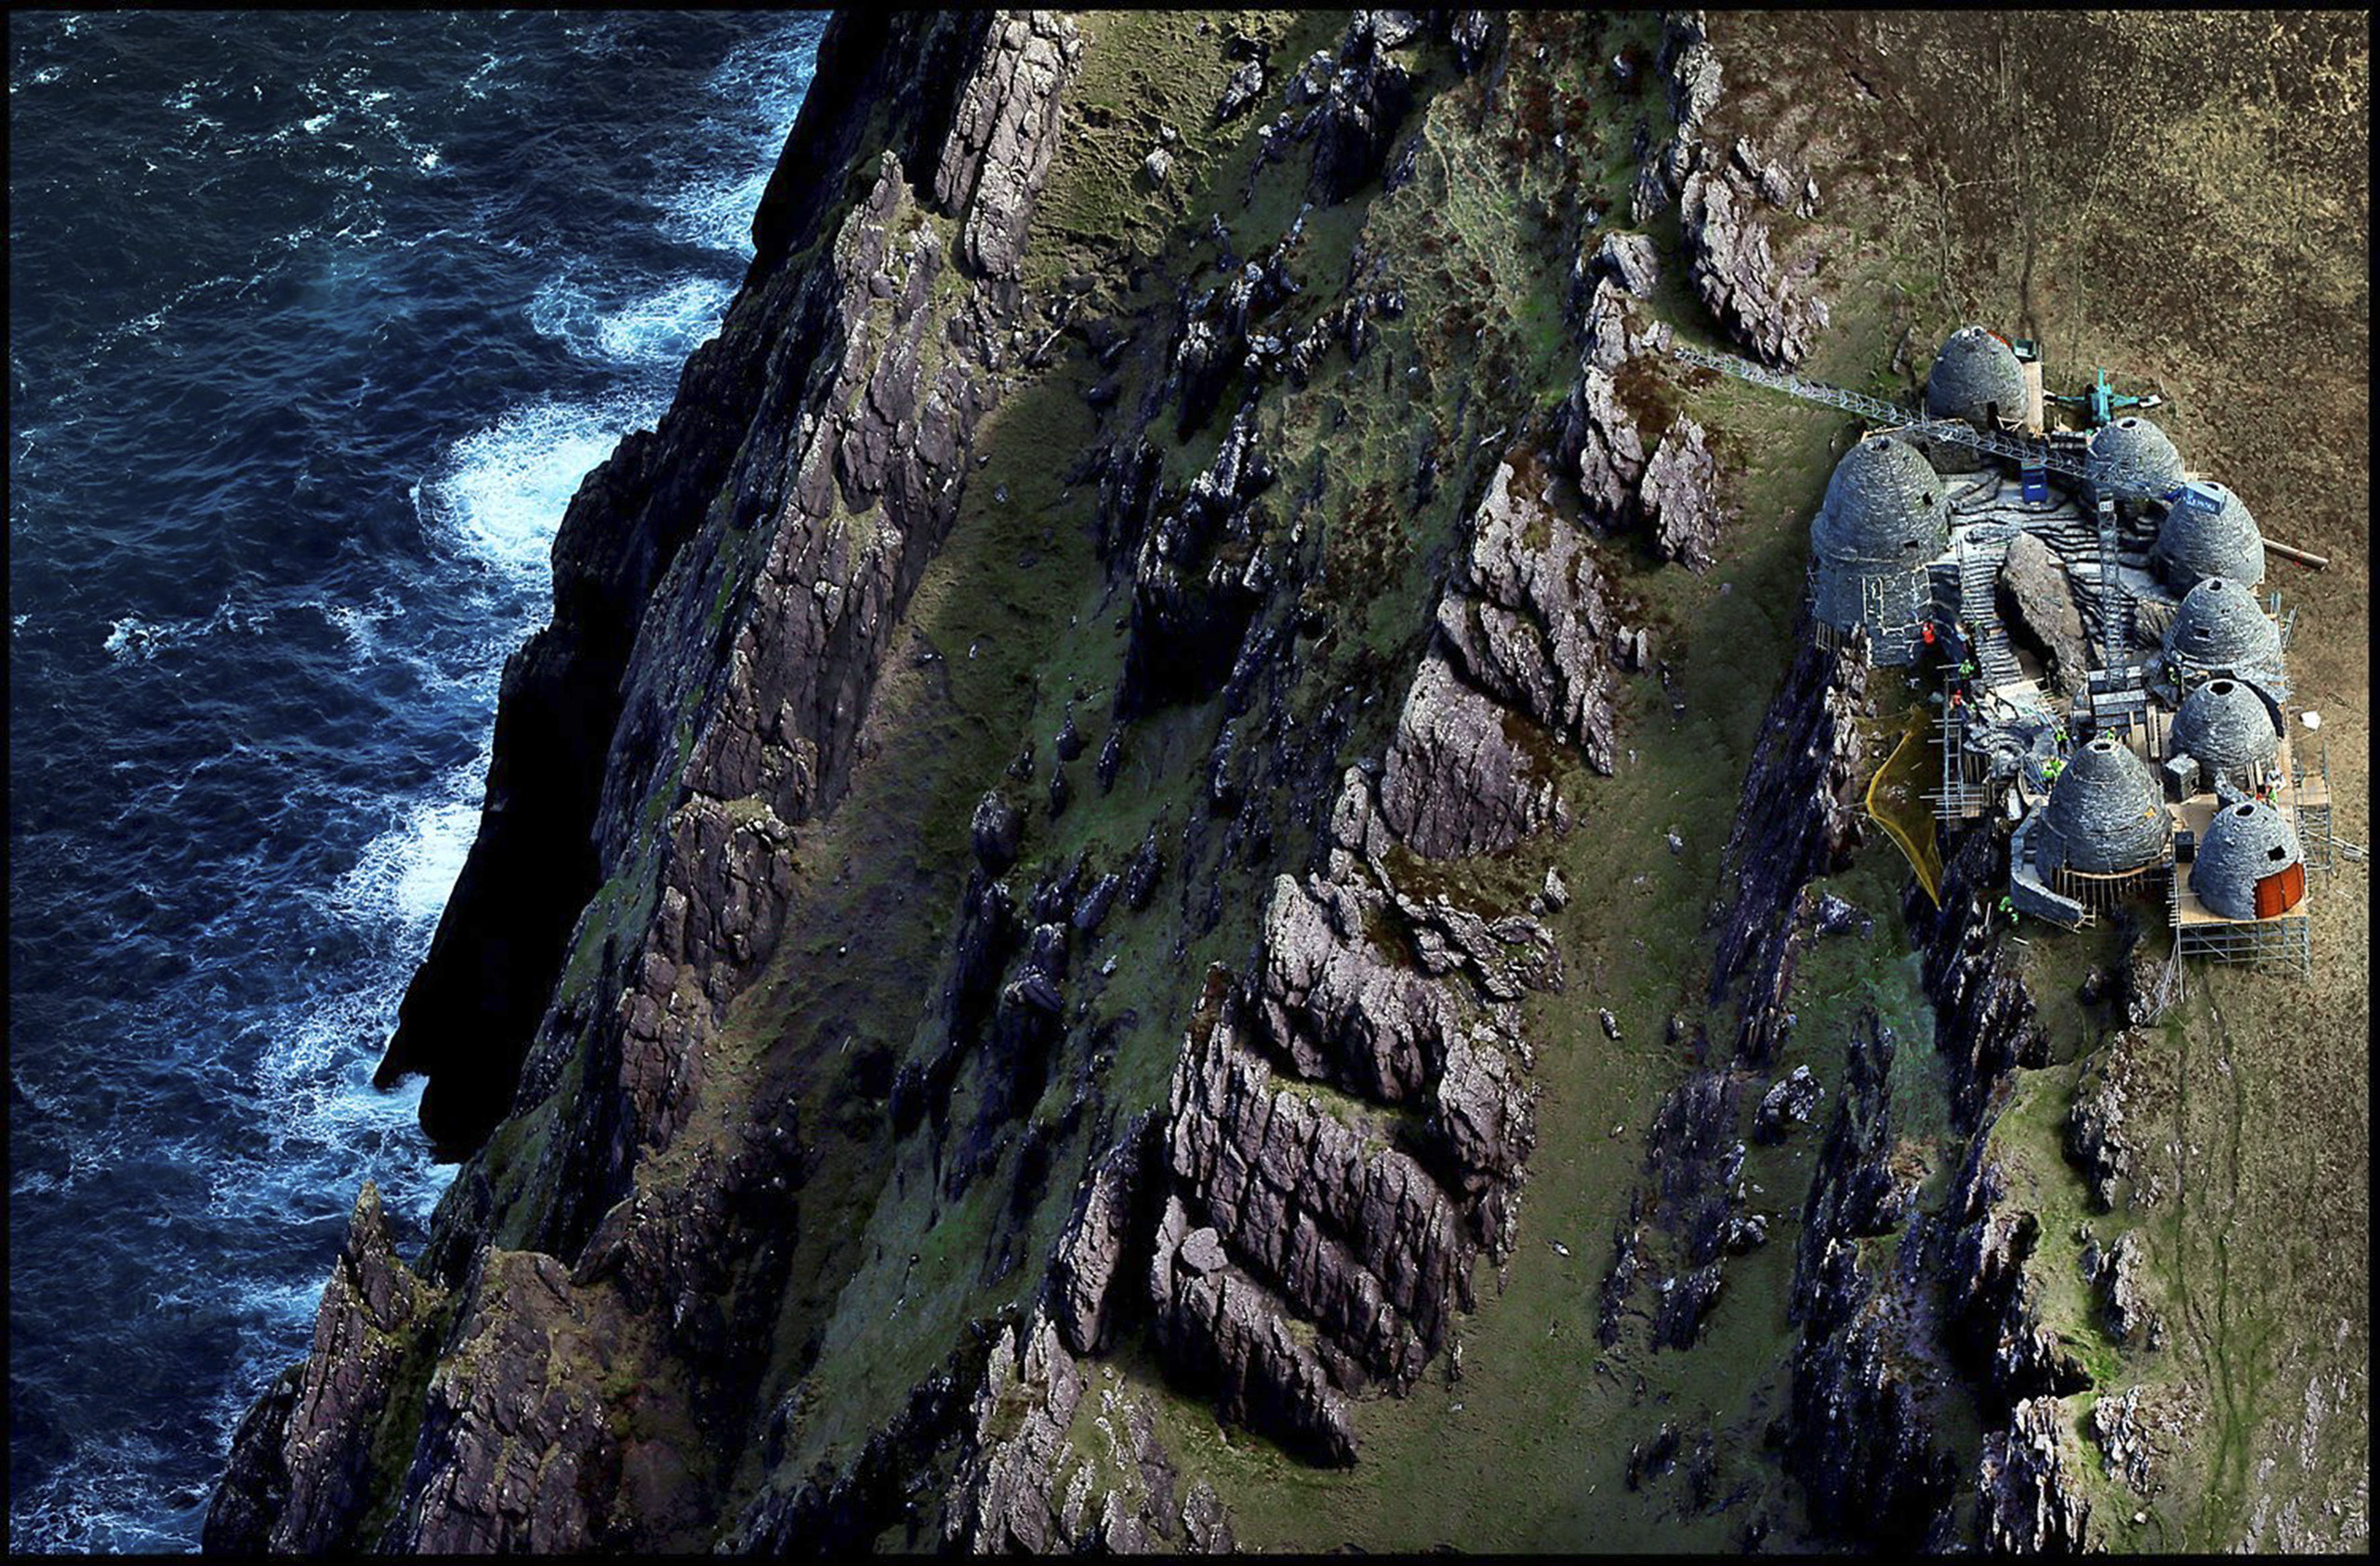 A replica of the sixth-century monastic settlement has been recreated on top of Ceann Sibéal on the Dingle Peninsula in Ireland's Co Kerry, ahead of "Star Wars" filming, April 30, 2016. The site, which includes eight beehive huts, is supposed to be the planet Ahch-To, home to the first Jedi temple where Luke Skywalker has been in exile, and is just one of several locations being used along the western Ireland seaboard. (Irish Independent/eyevine/Redux)